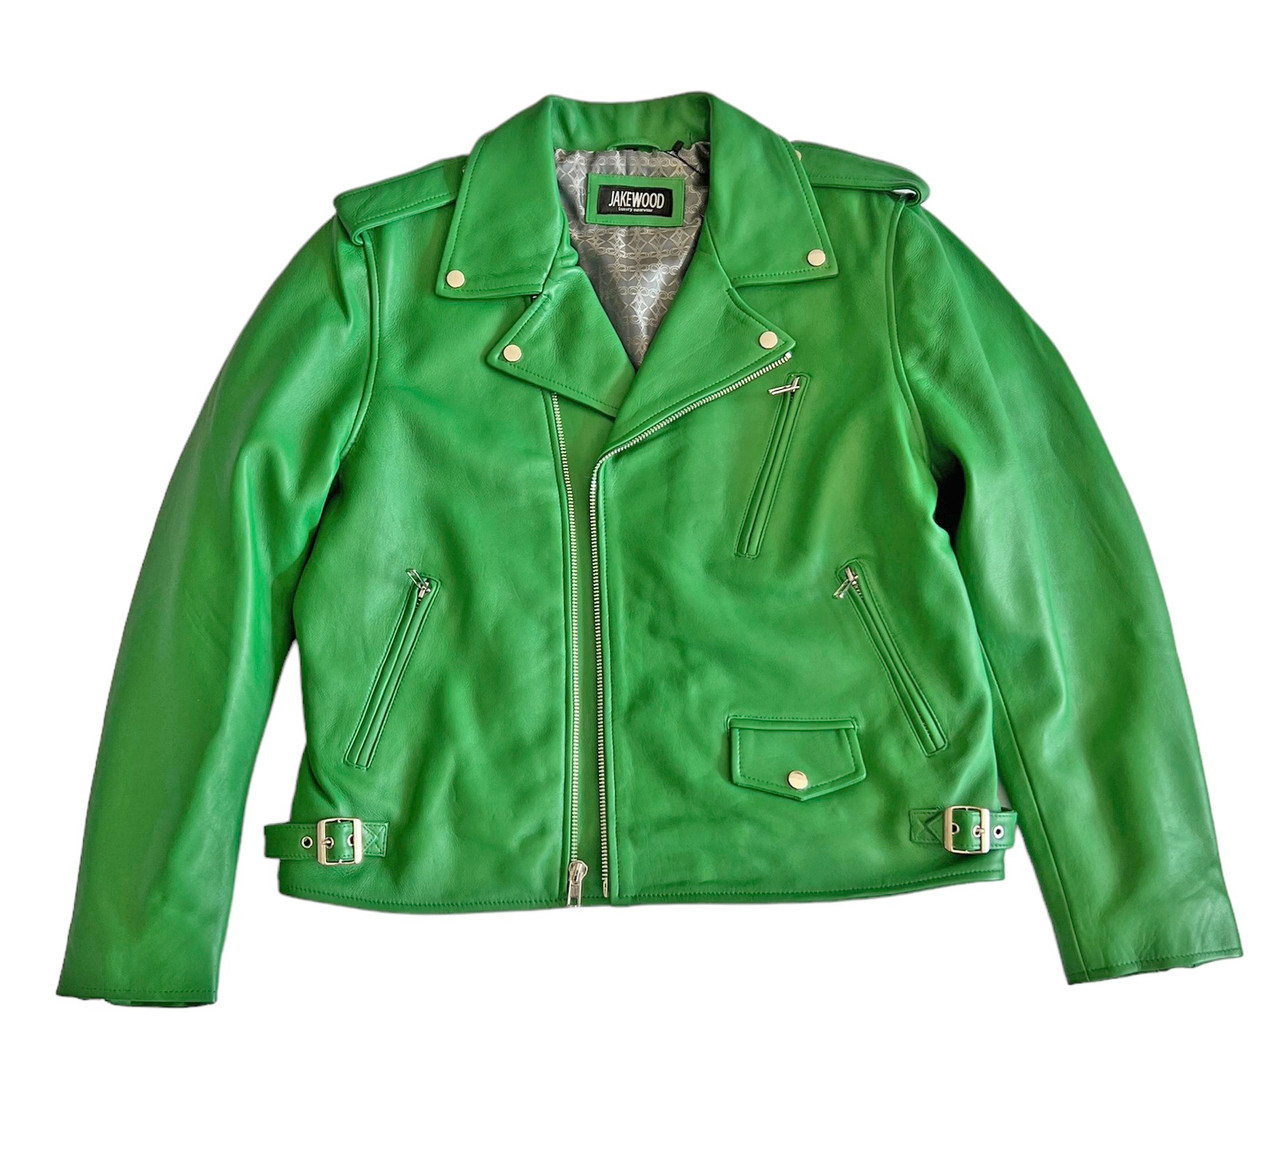 Men's Lambskin Leather Coats and Jackets